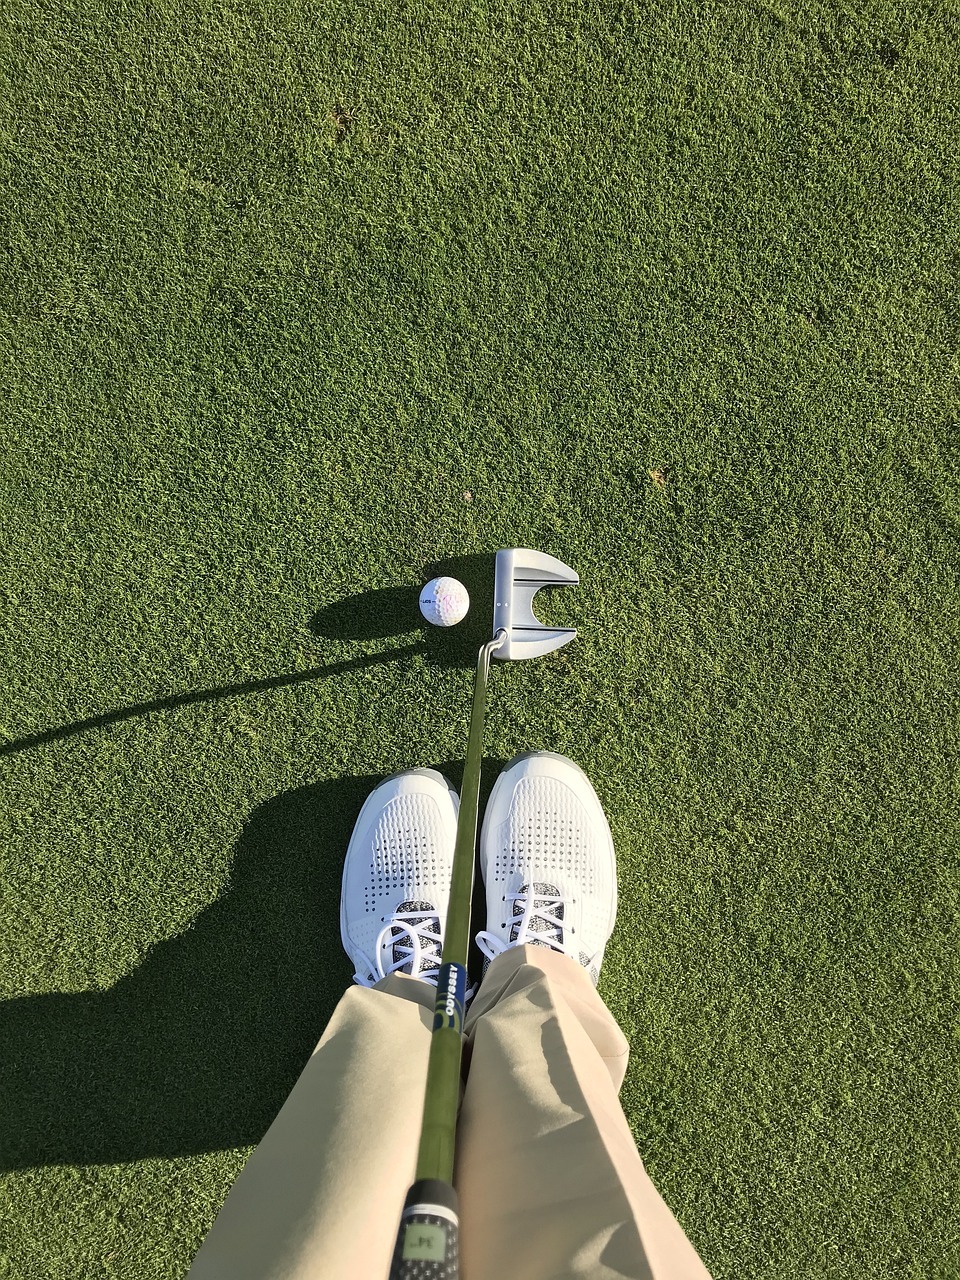 Do golf shoes help you to play better?